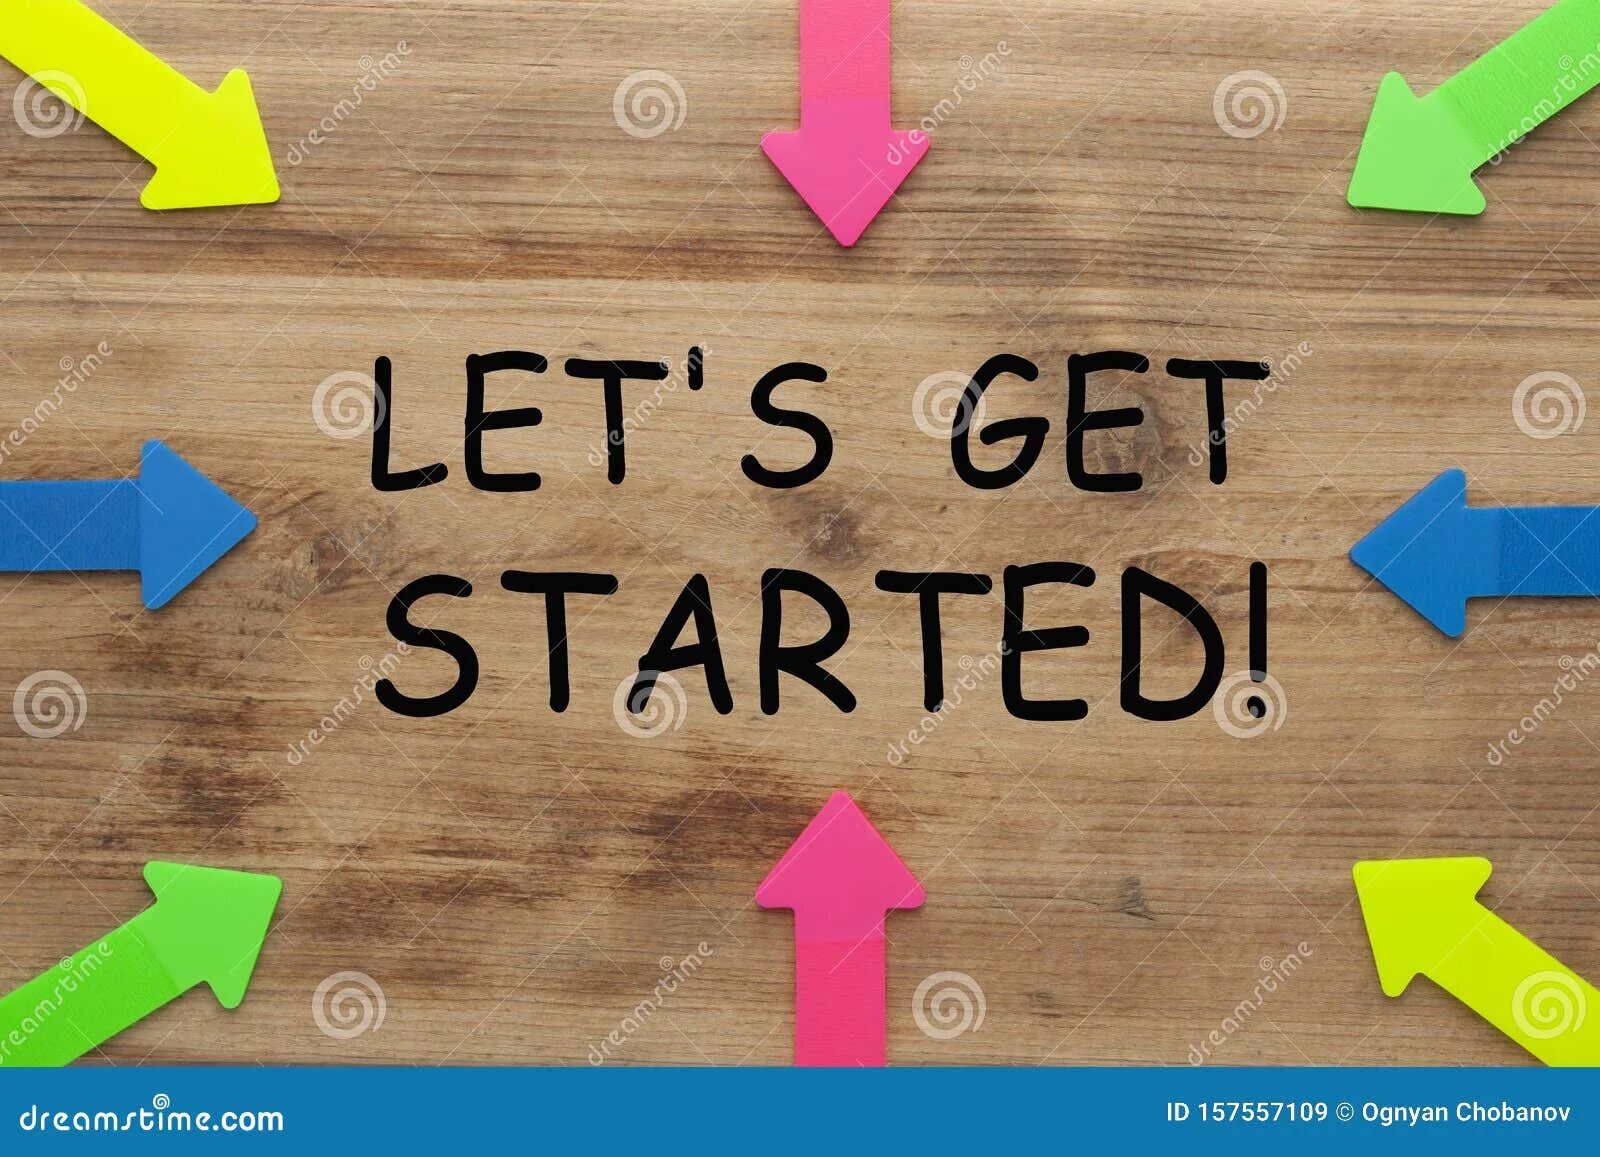 We well get started. Летс старт. Let`s start. Let's get started Сток. Lets start для презентации.